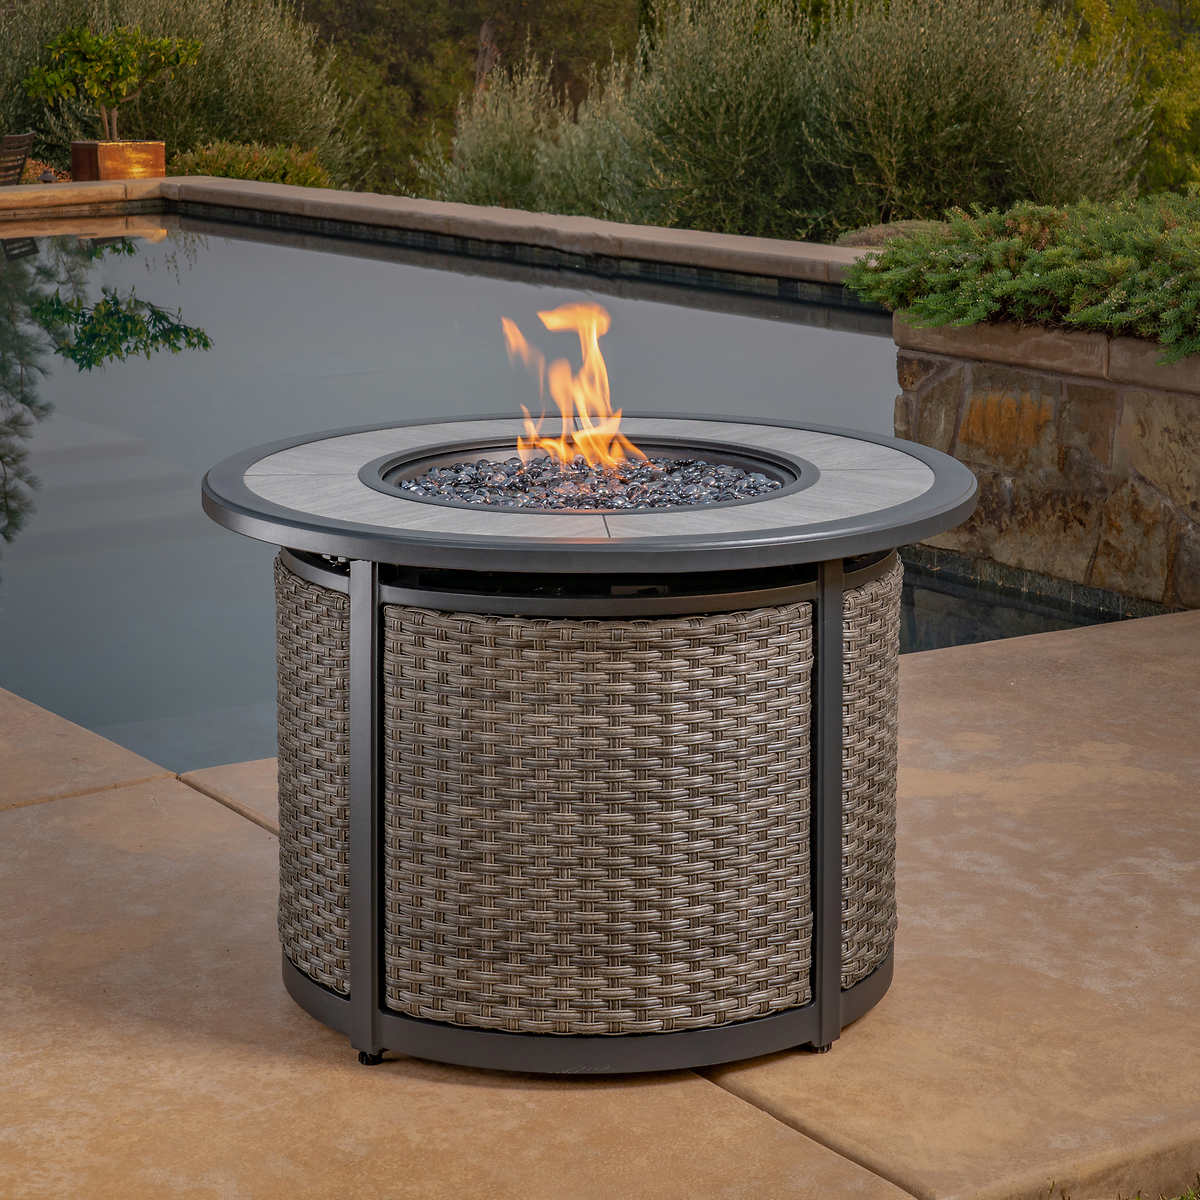 Madison Fire Pit Table Costco, Are Fire Pits Worth It